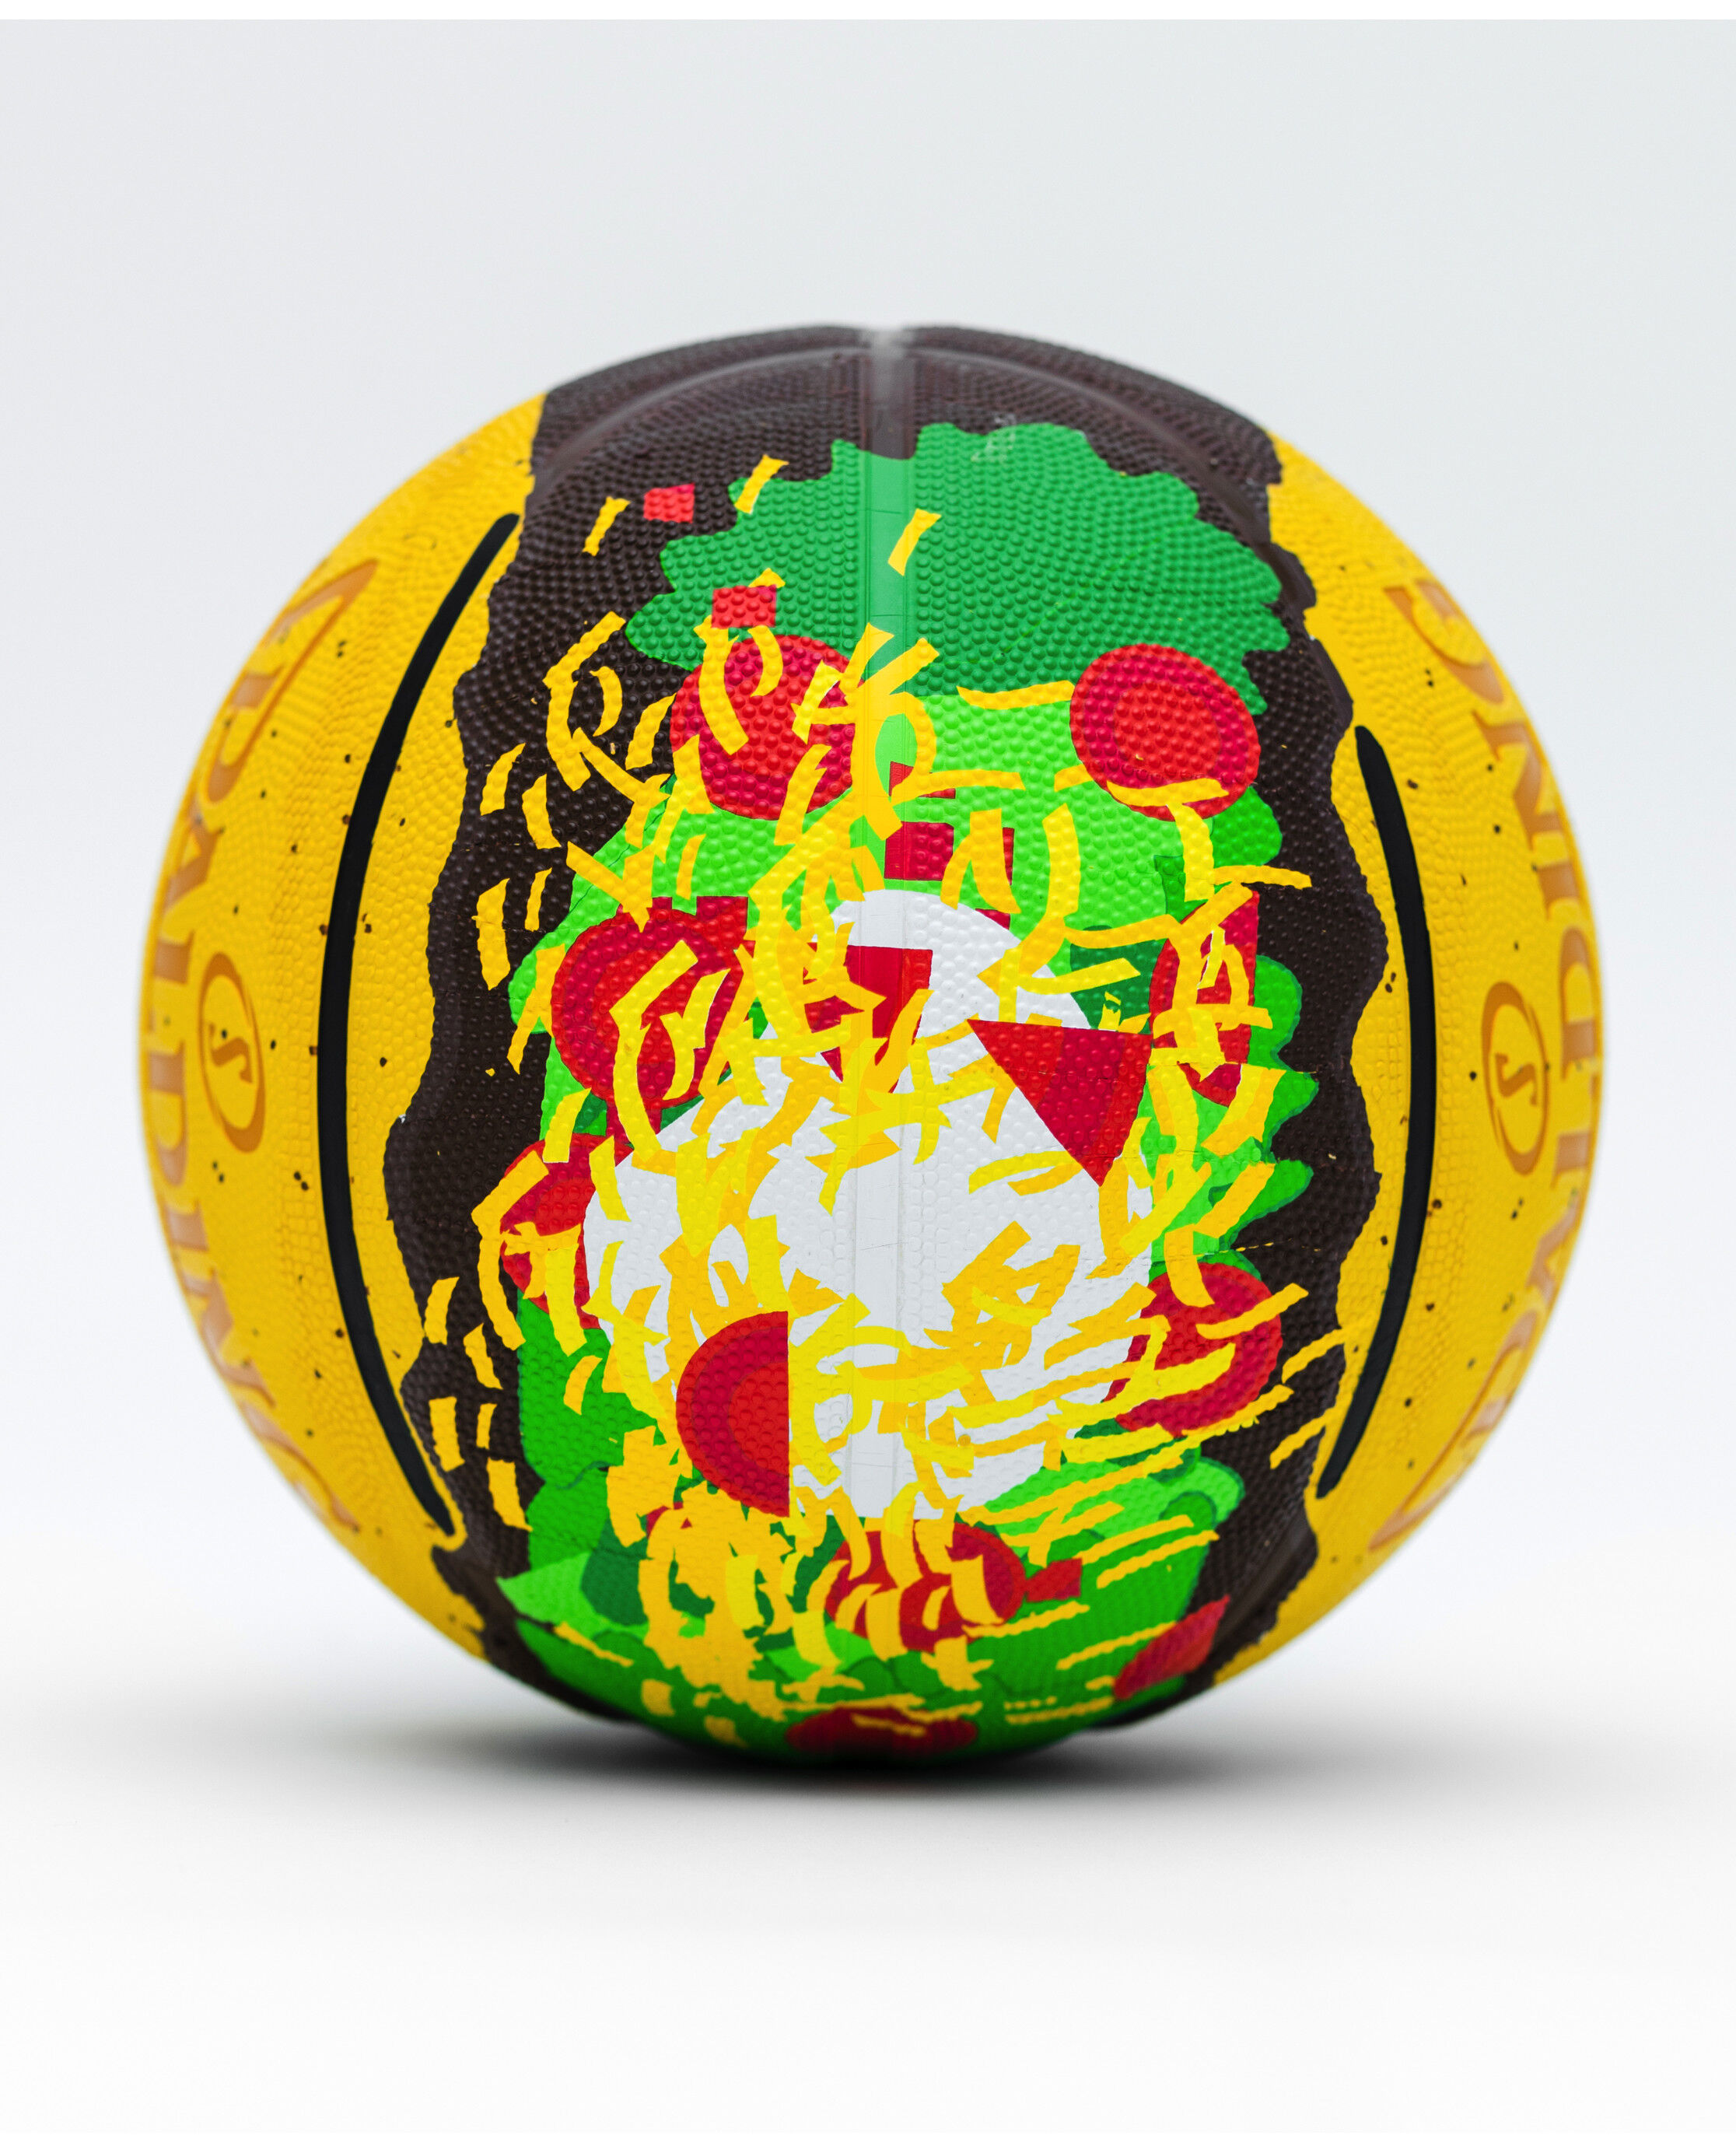 NEW Spalding Street Taco Supreme Limited Edition Basketball 